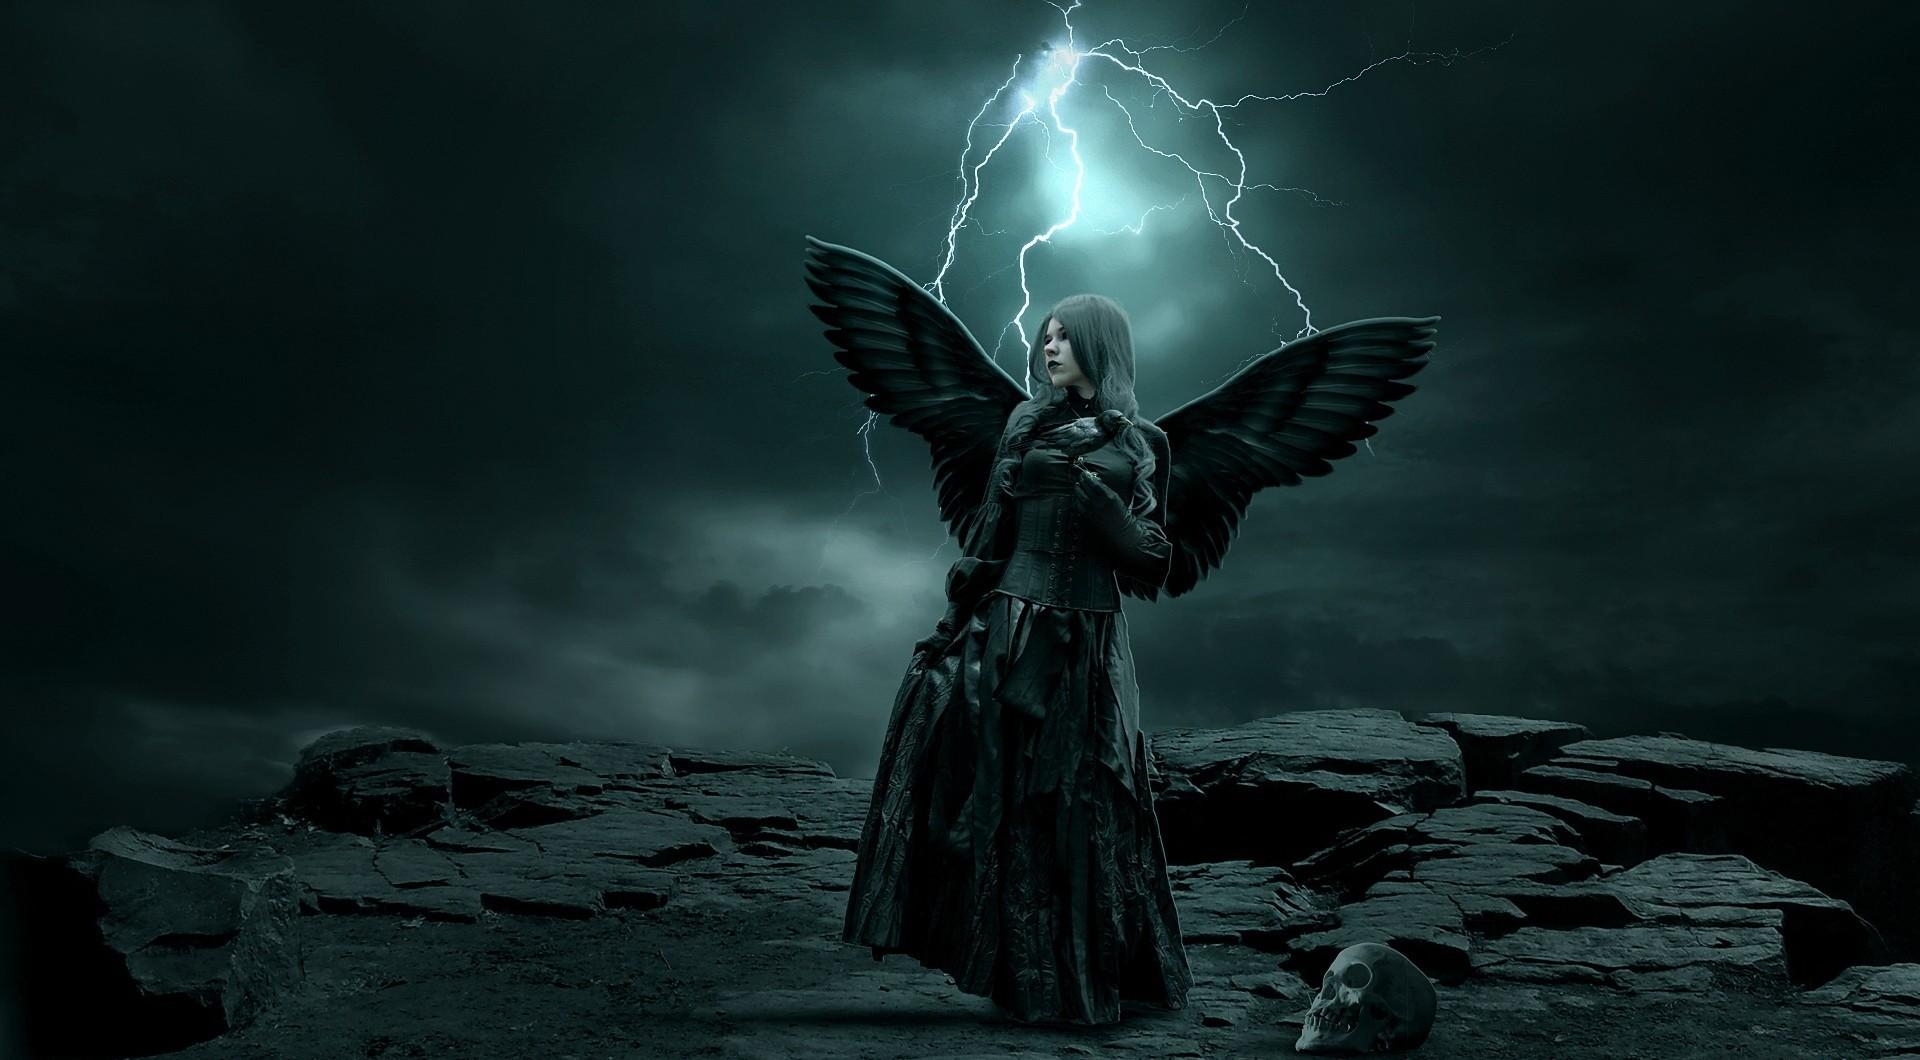 96467 download wallpaper fantasy, lightning, rock, darkness, girl, wings, skull screensavers and pictures for free